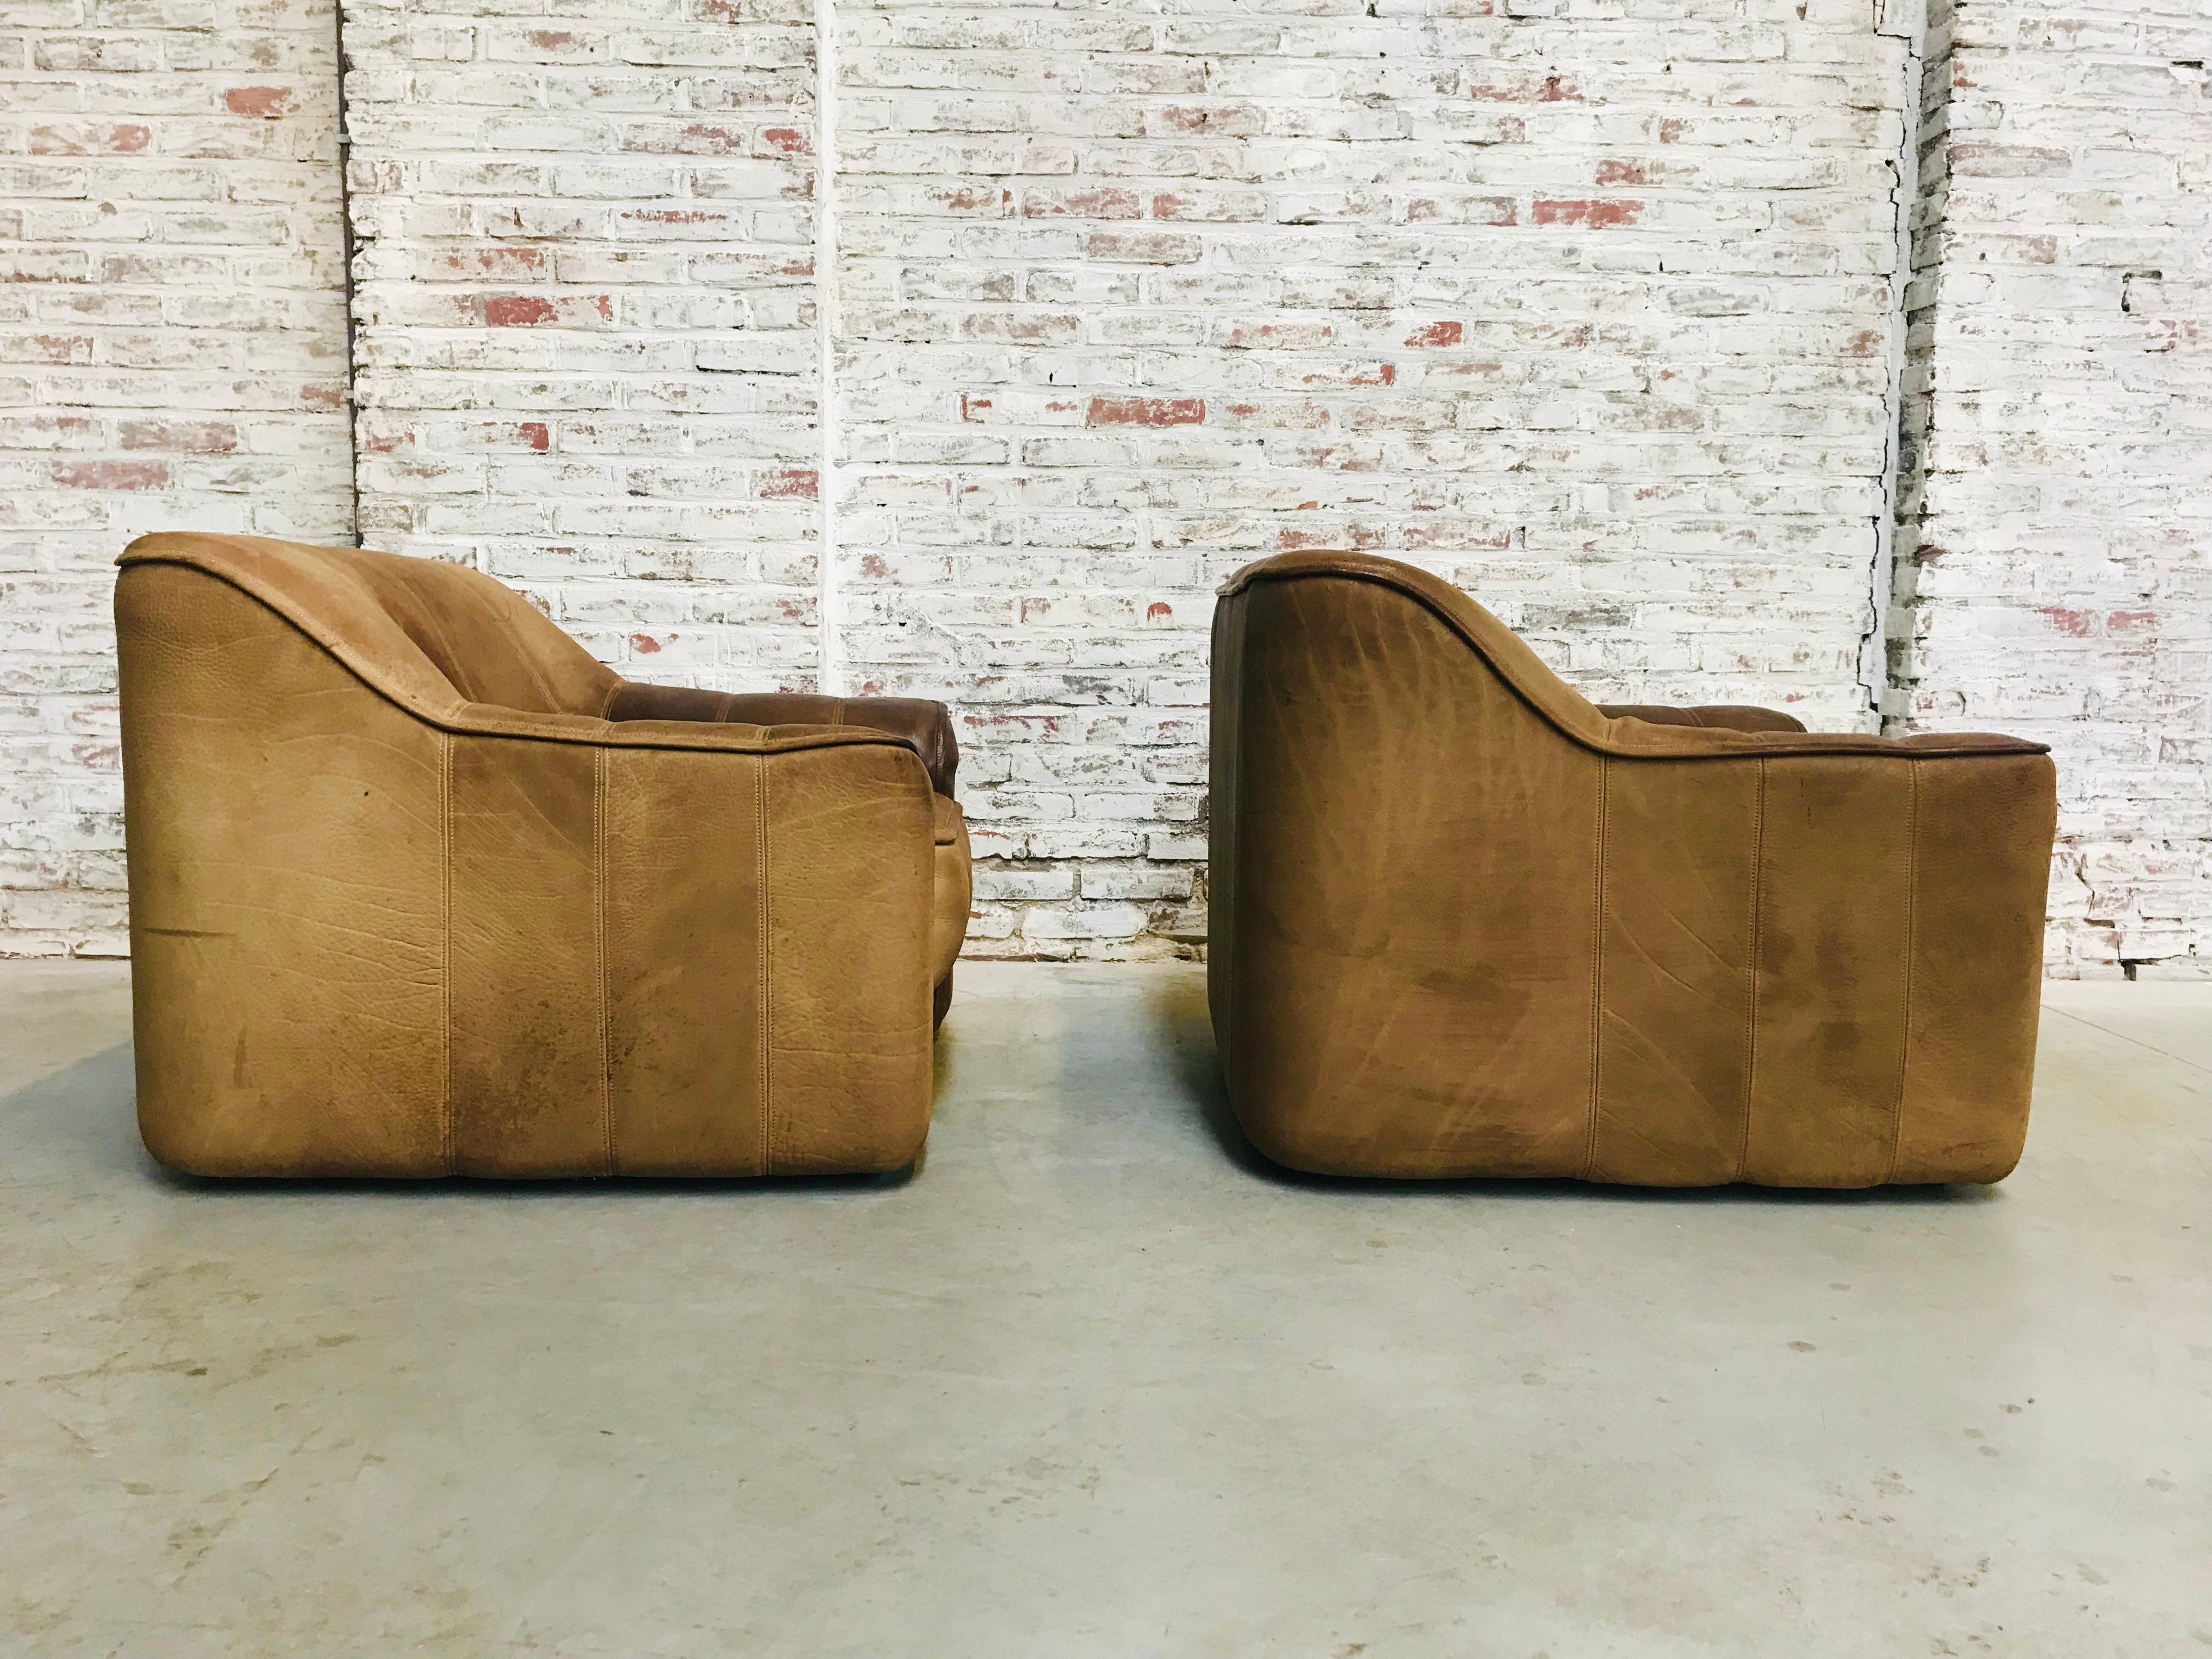 Swiss Set of 2 De Sede Ds-44 Lounge Chairs in Neck Leather by Desede, 1970s